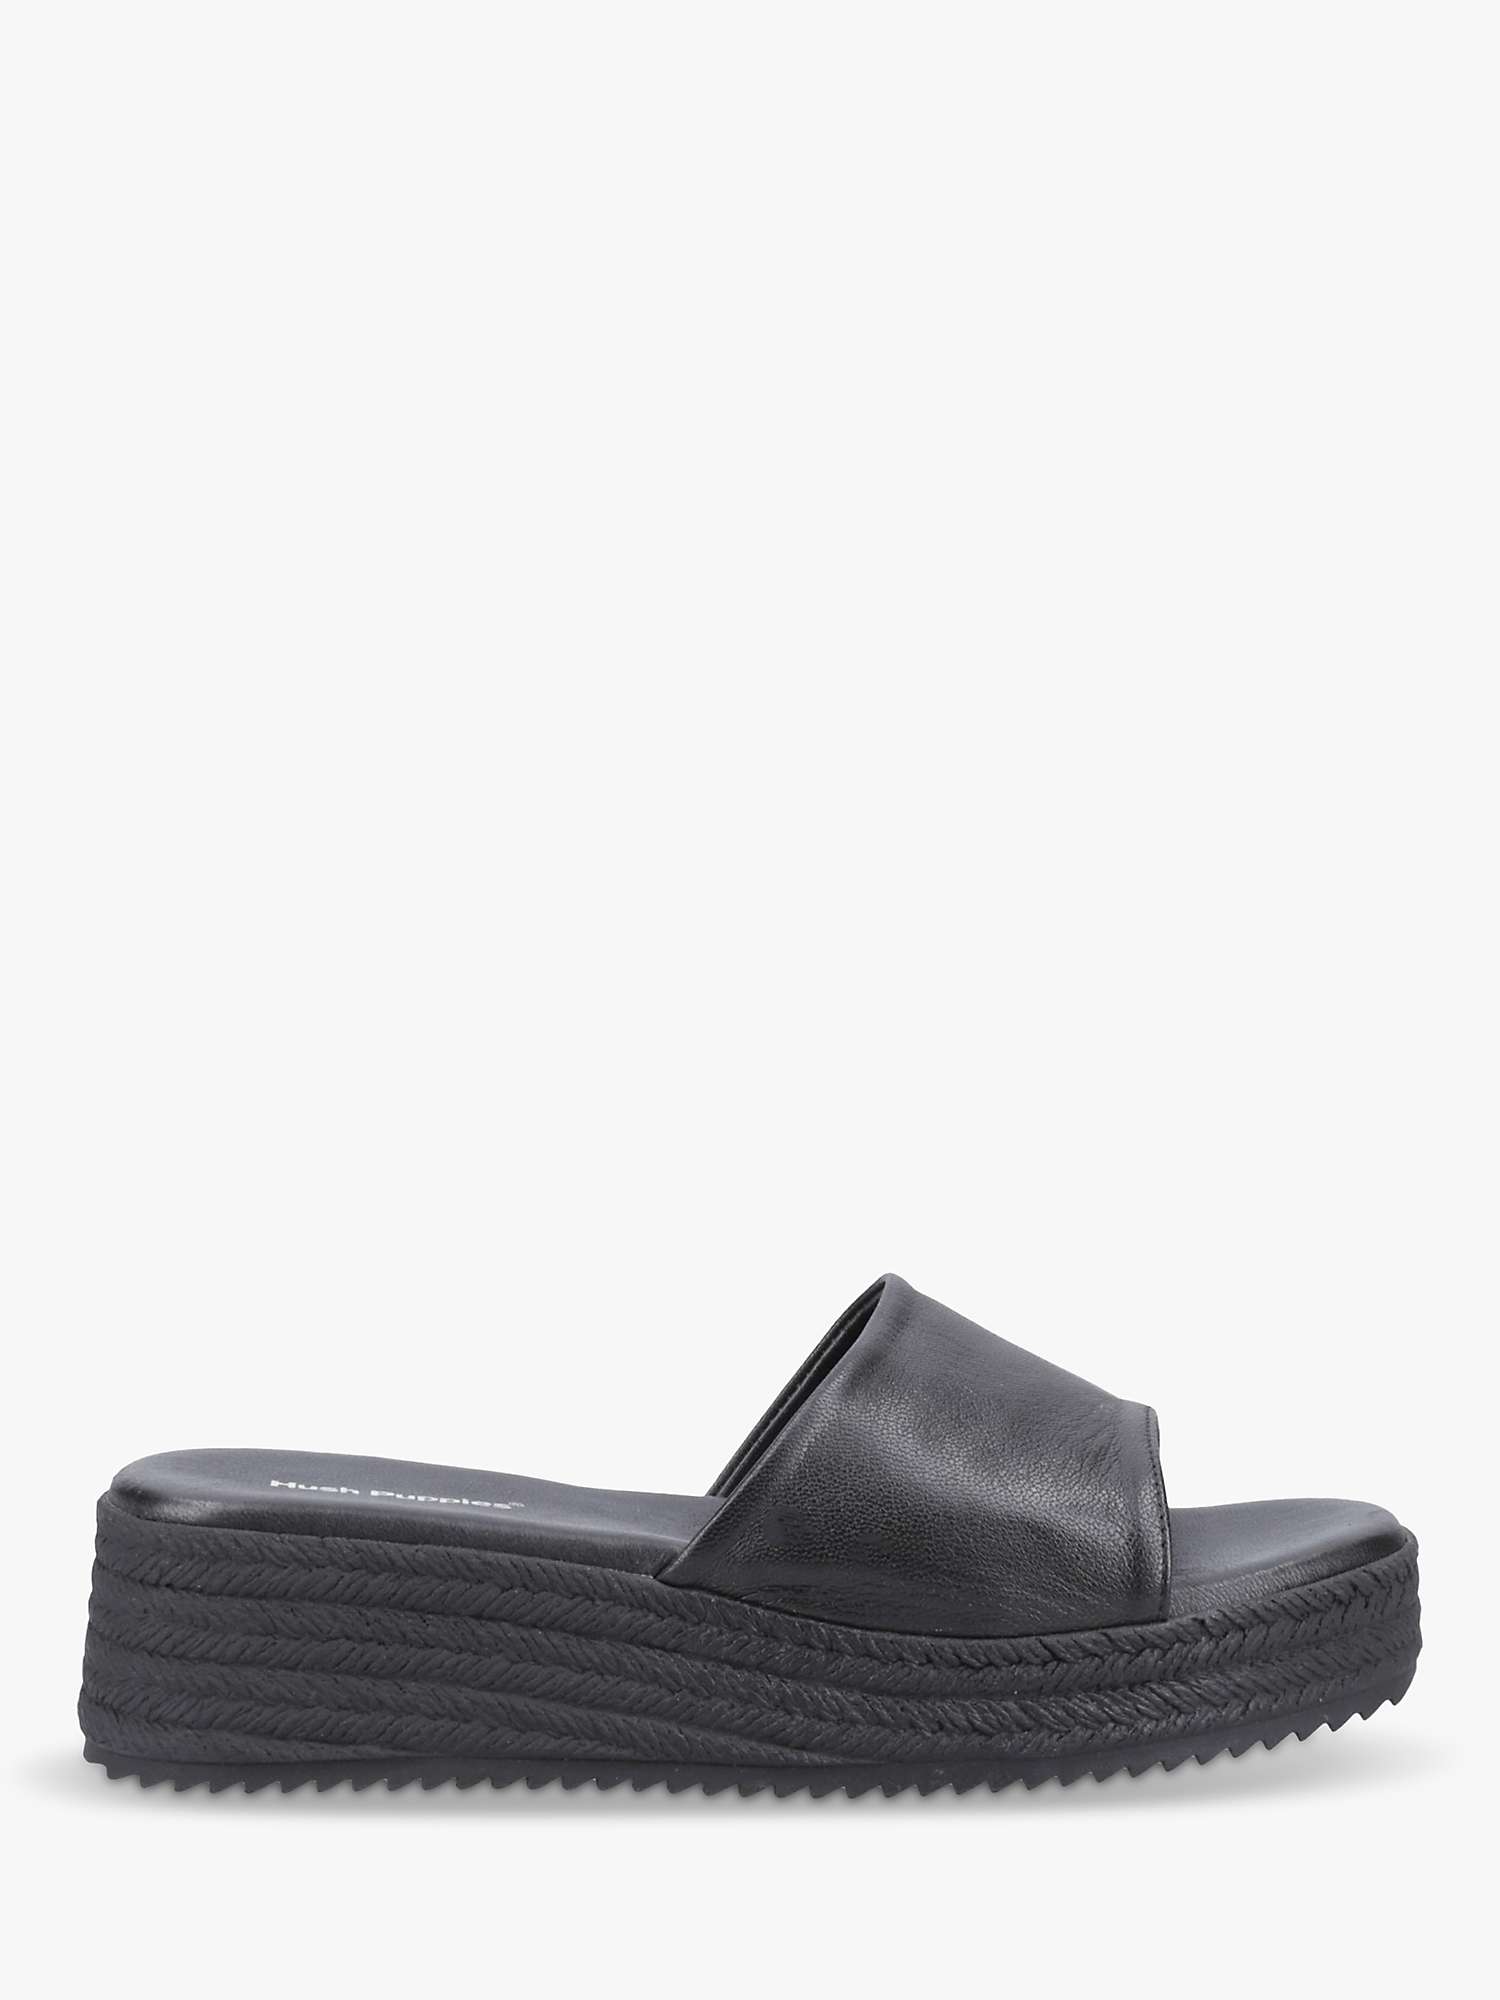 Buy Hush Puppies Robin Leather Espadrille Sliders Online at johnlewis.com